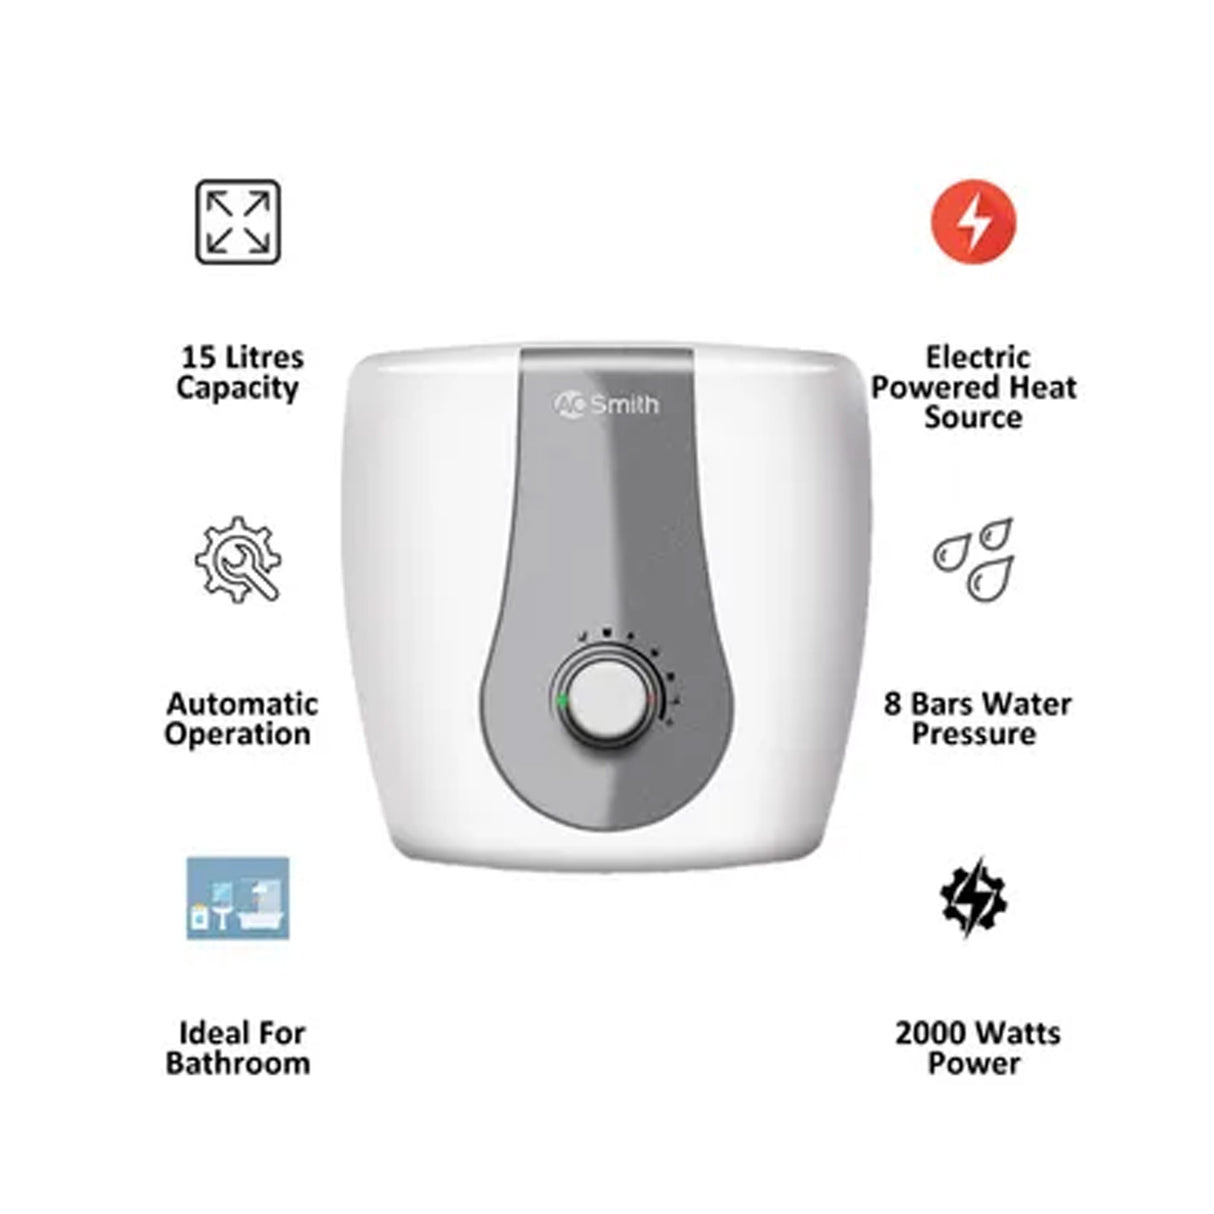 Upgrade to Excellence: AO Smith Finesse 15L Water Geyser – Your Best Water Heater Choice.